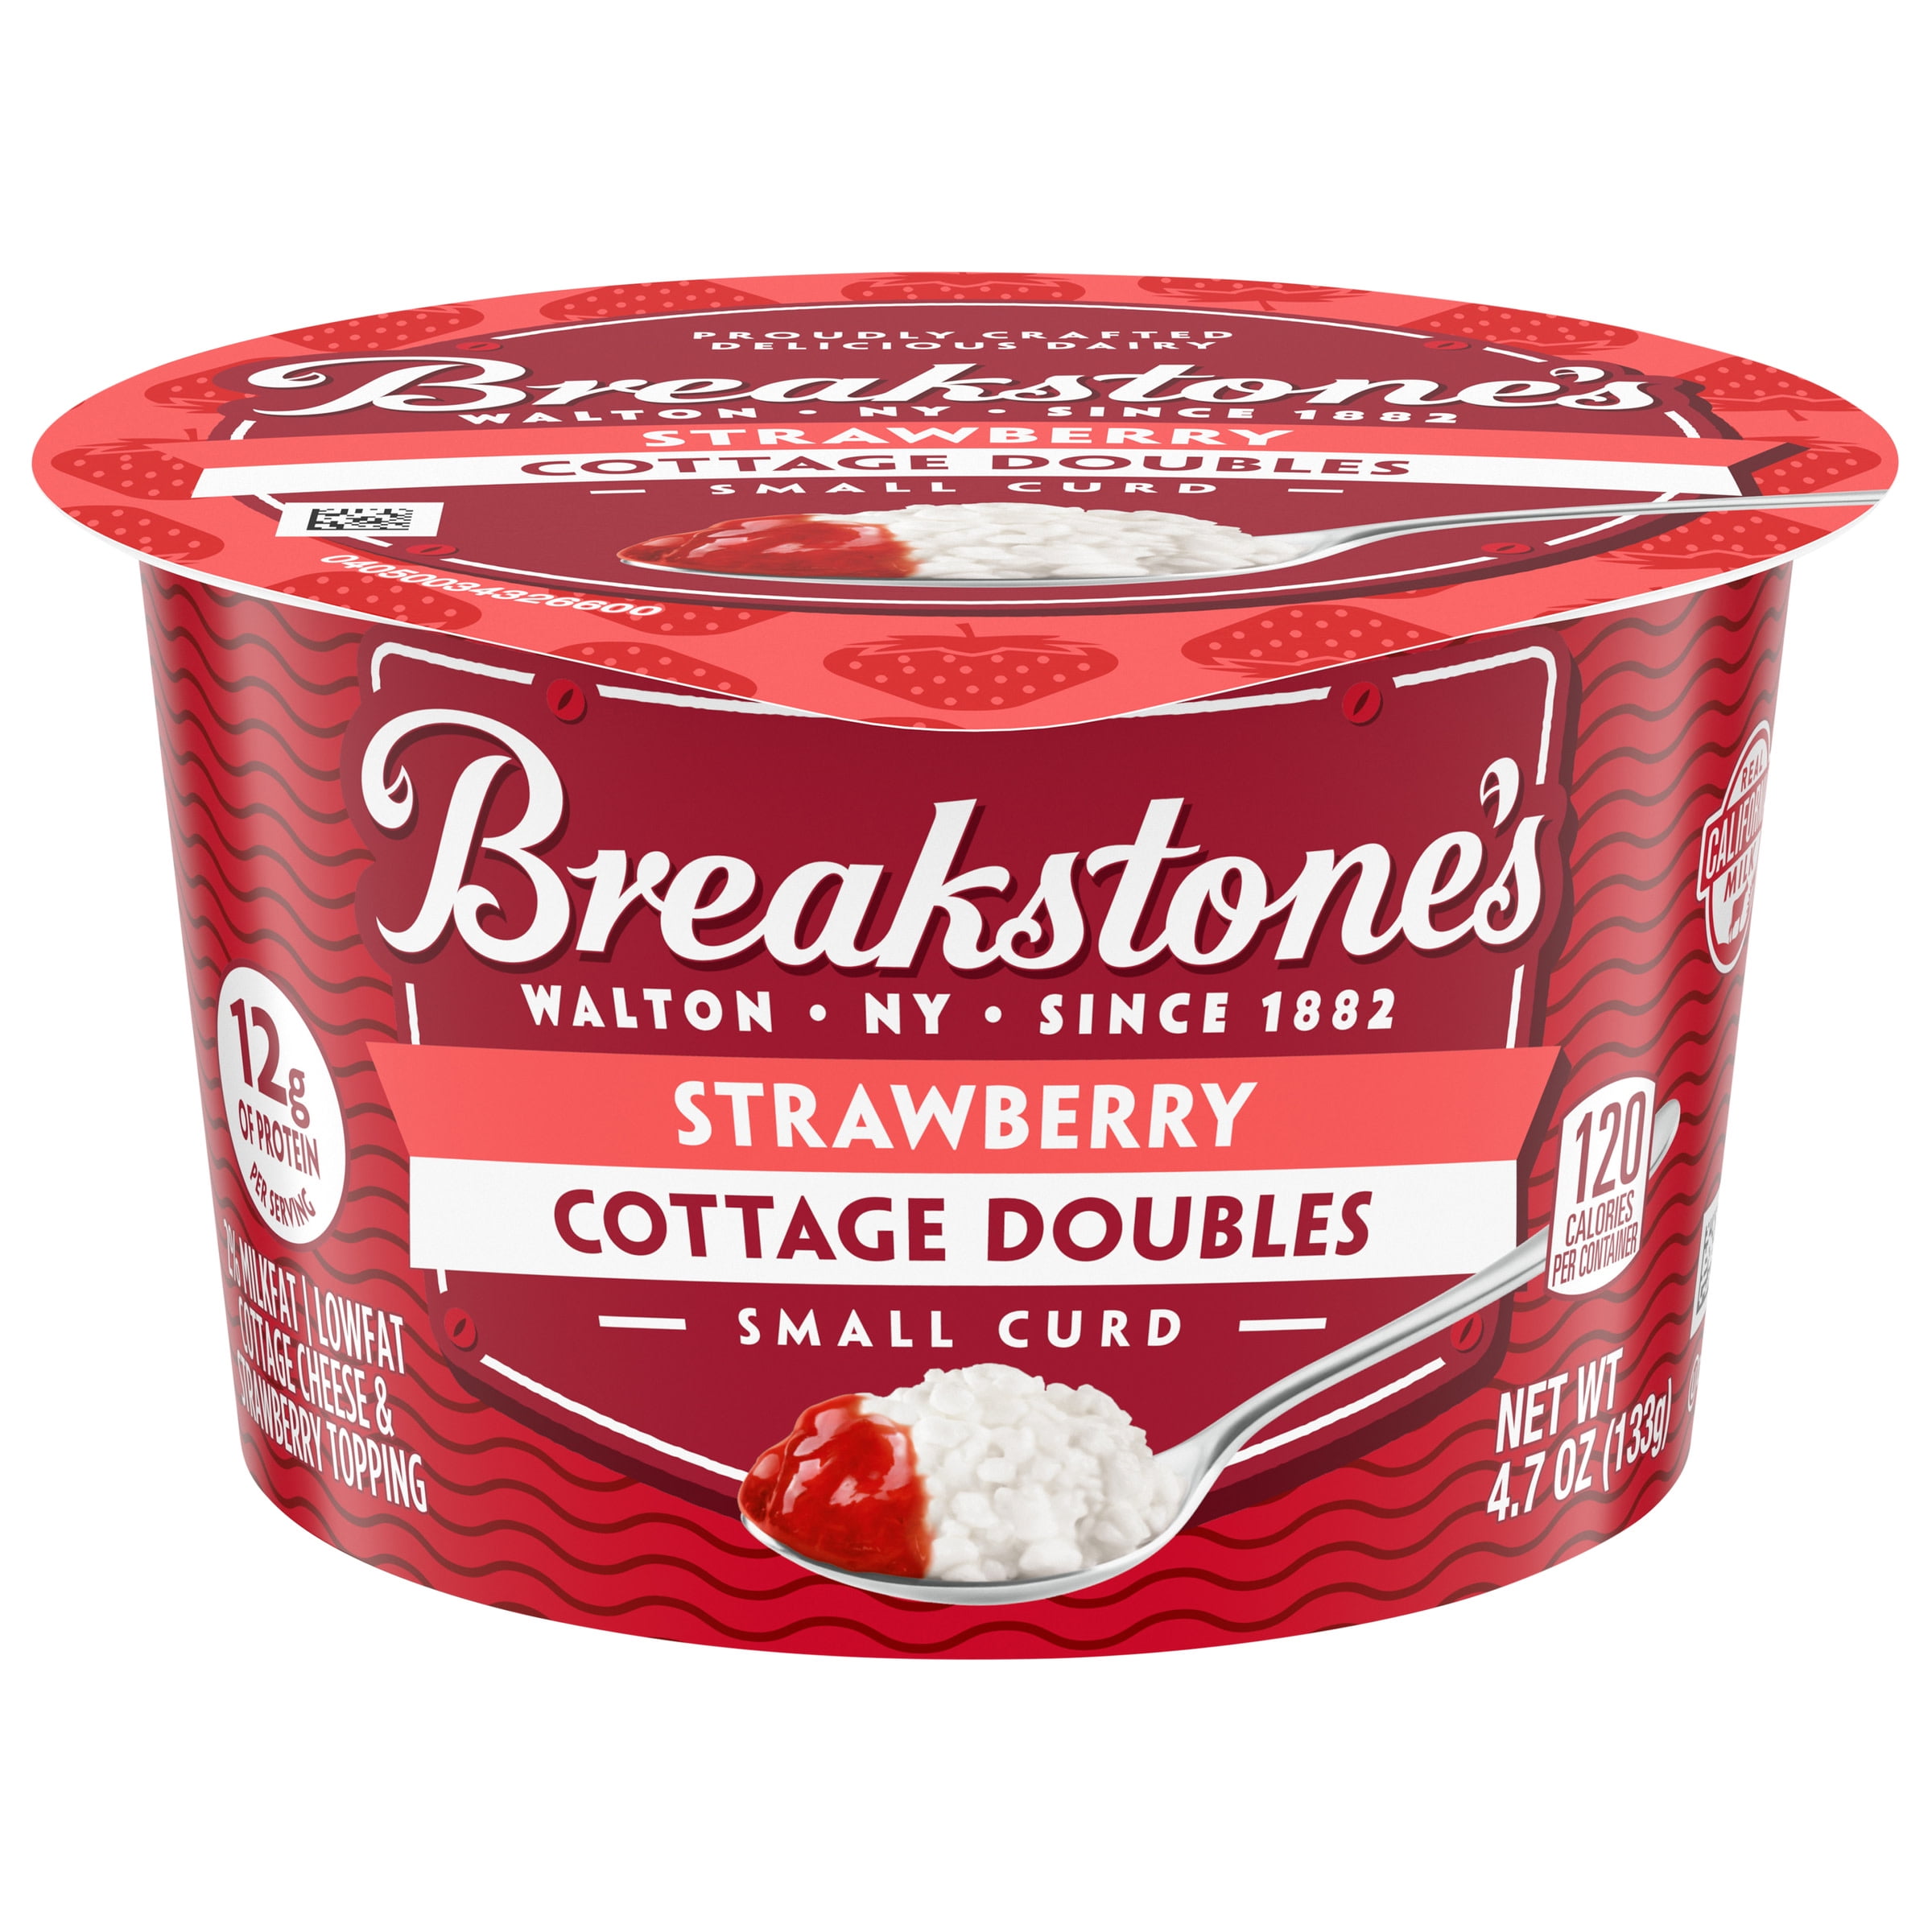 Breakstone's Cottage Doubles Lowfat Cottage Cheese & Strawberry Topping with 2% Milkfat, 4.7 oz Cup